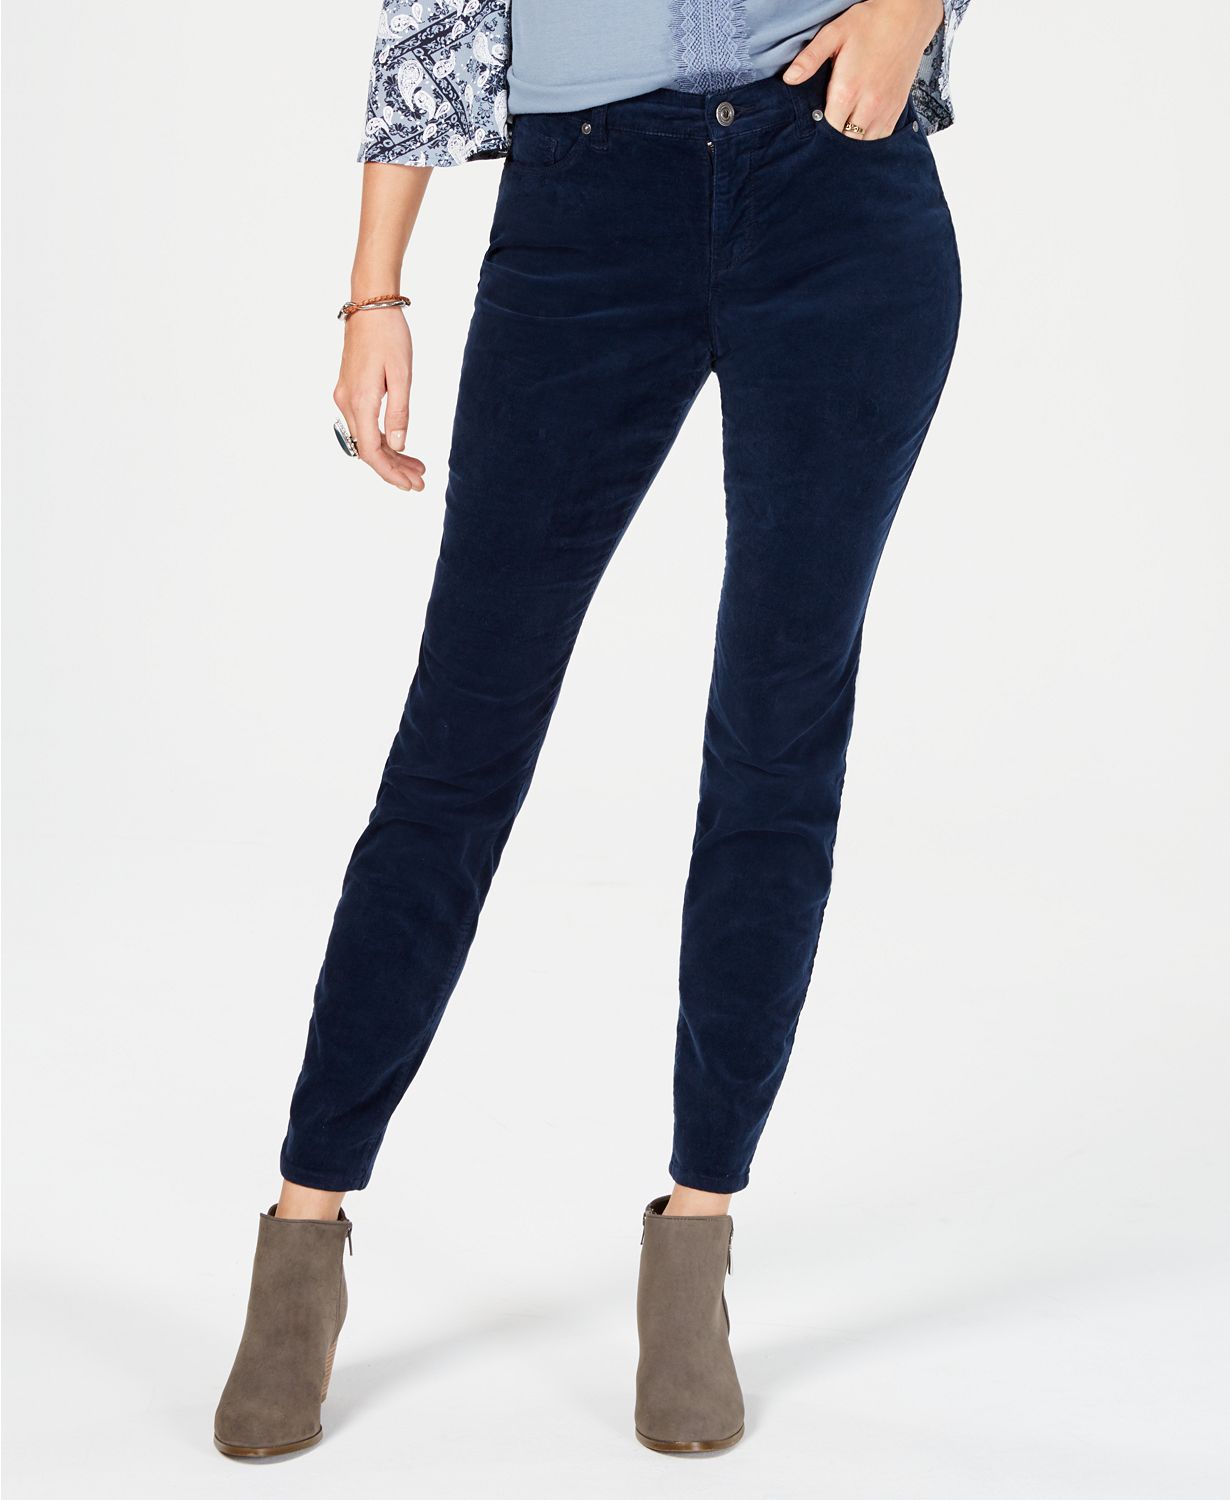 Style Co Curvy Corduroy Skinny Jeans Industrial Blue 2